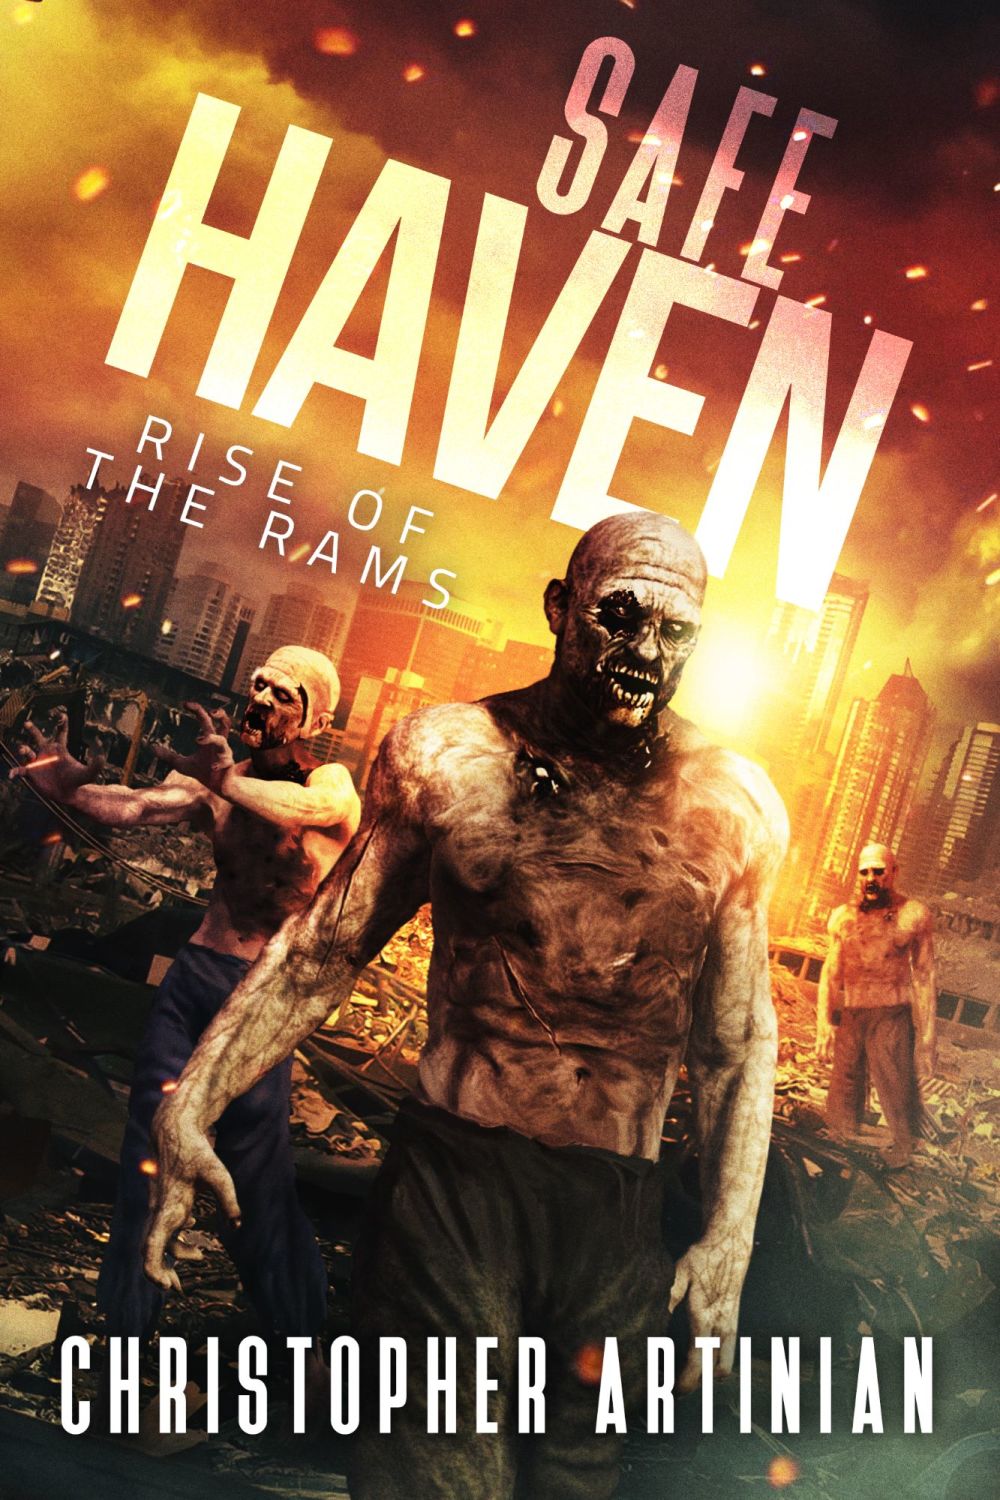 SAFE HAVEN: RISE OF THE RAMS (CVR 2) (SIGNED A4 PRINT)